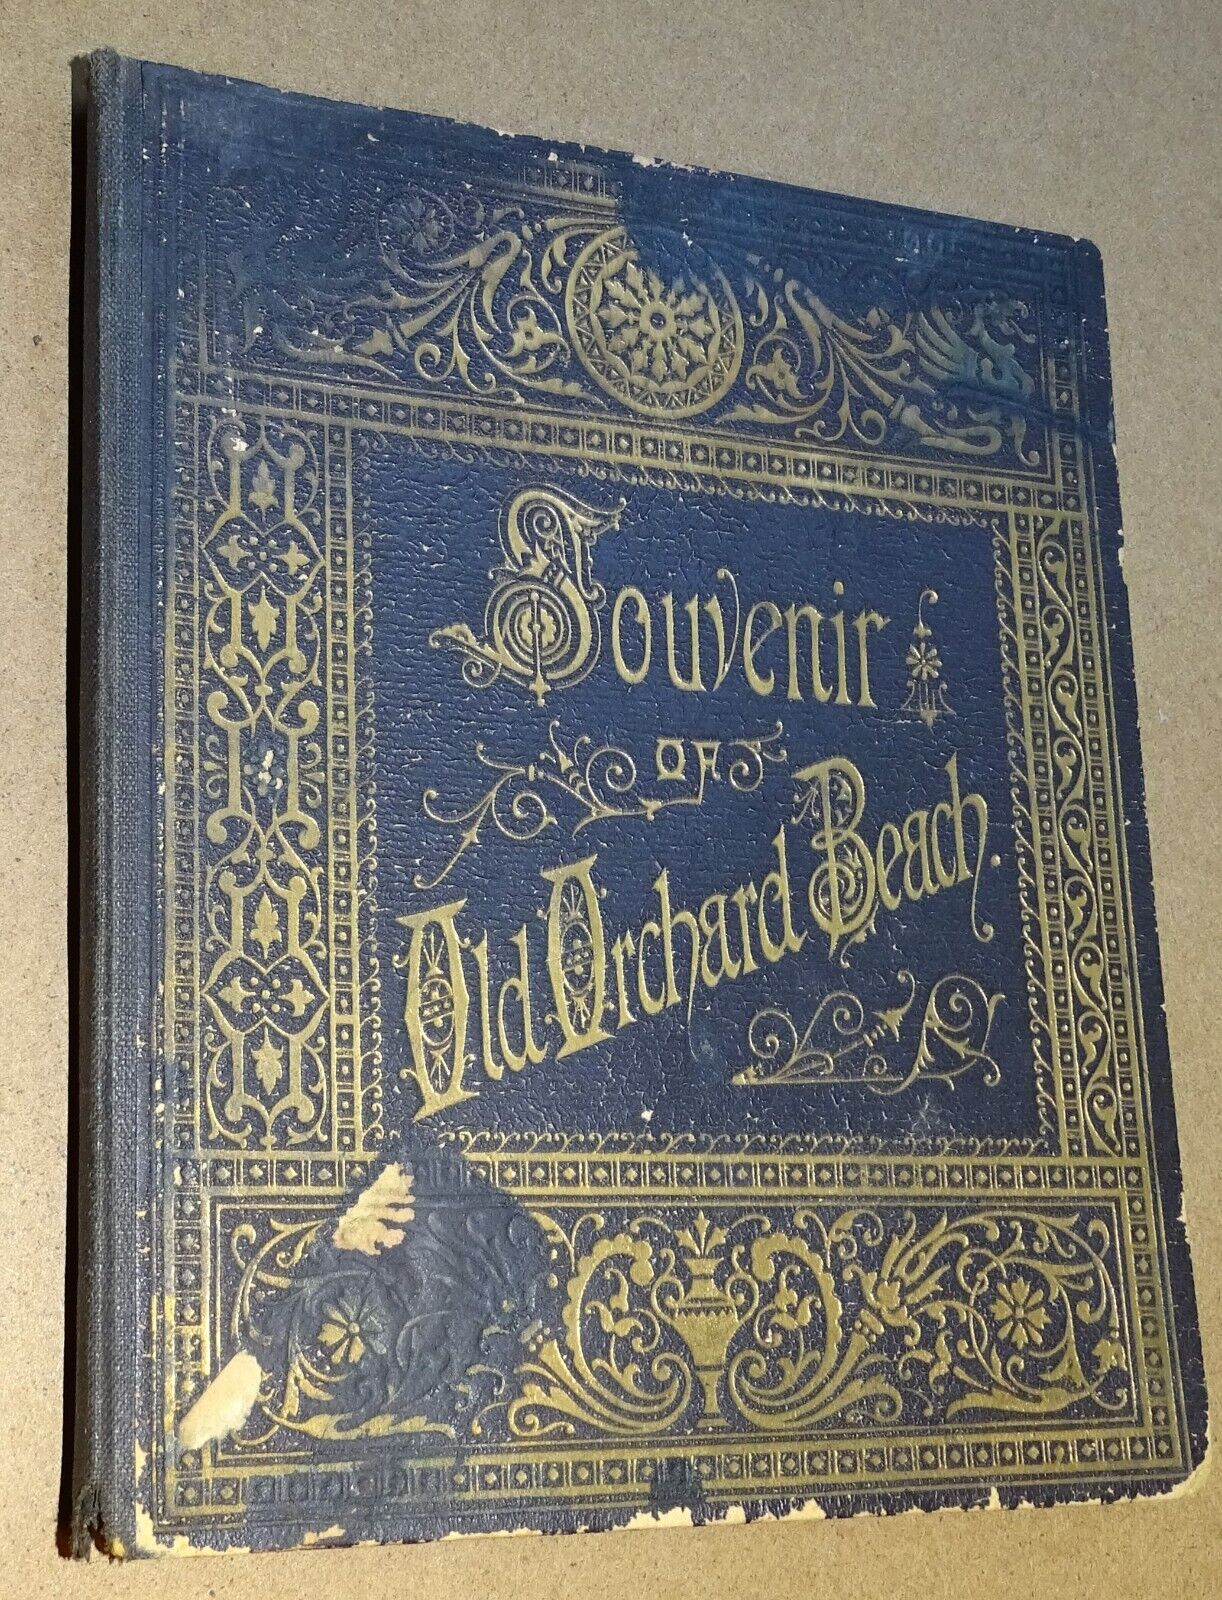 Souvenir of Old Orchard Beach - Chisholm Bros / Chis Frey Fold-Out (circa 1890s)